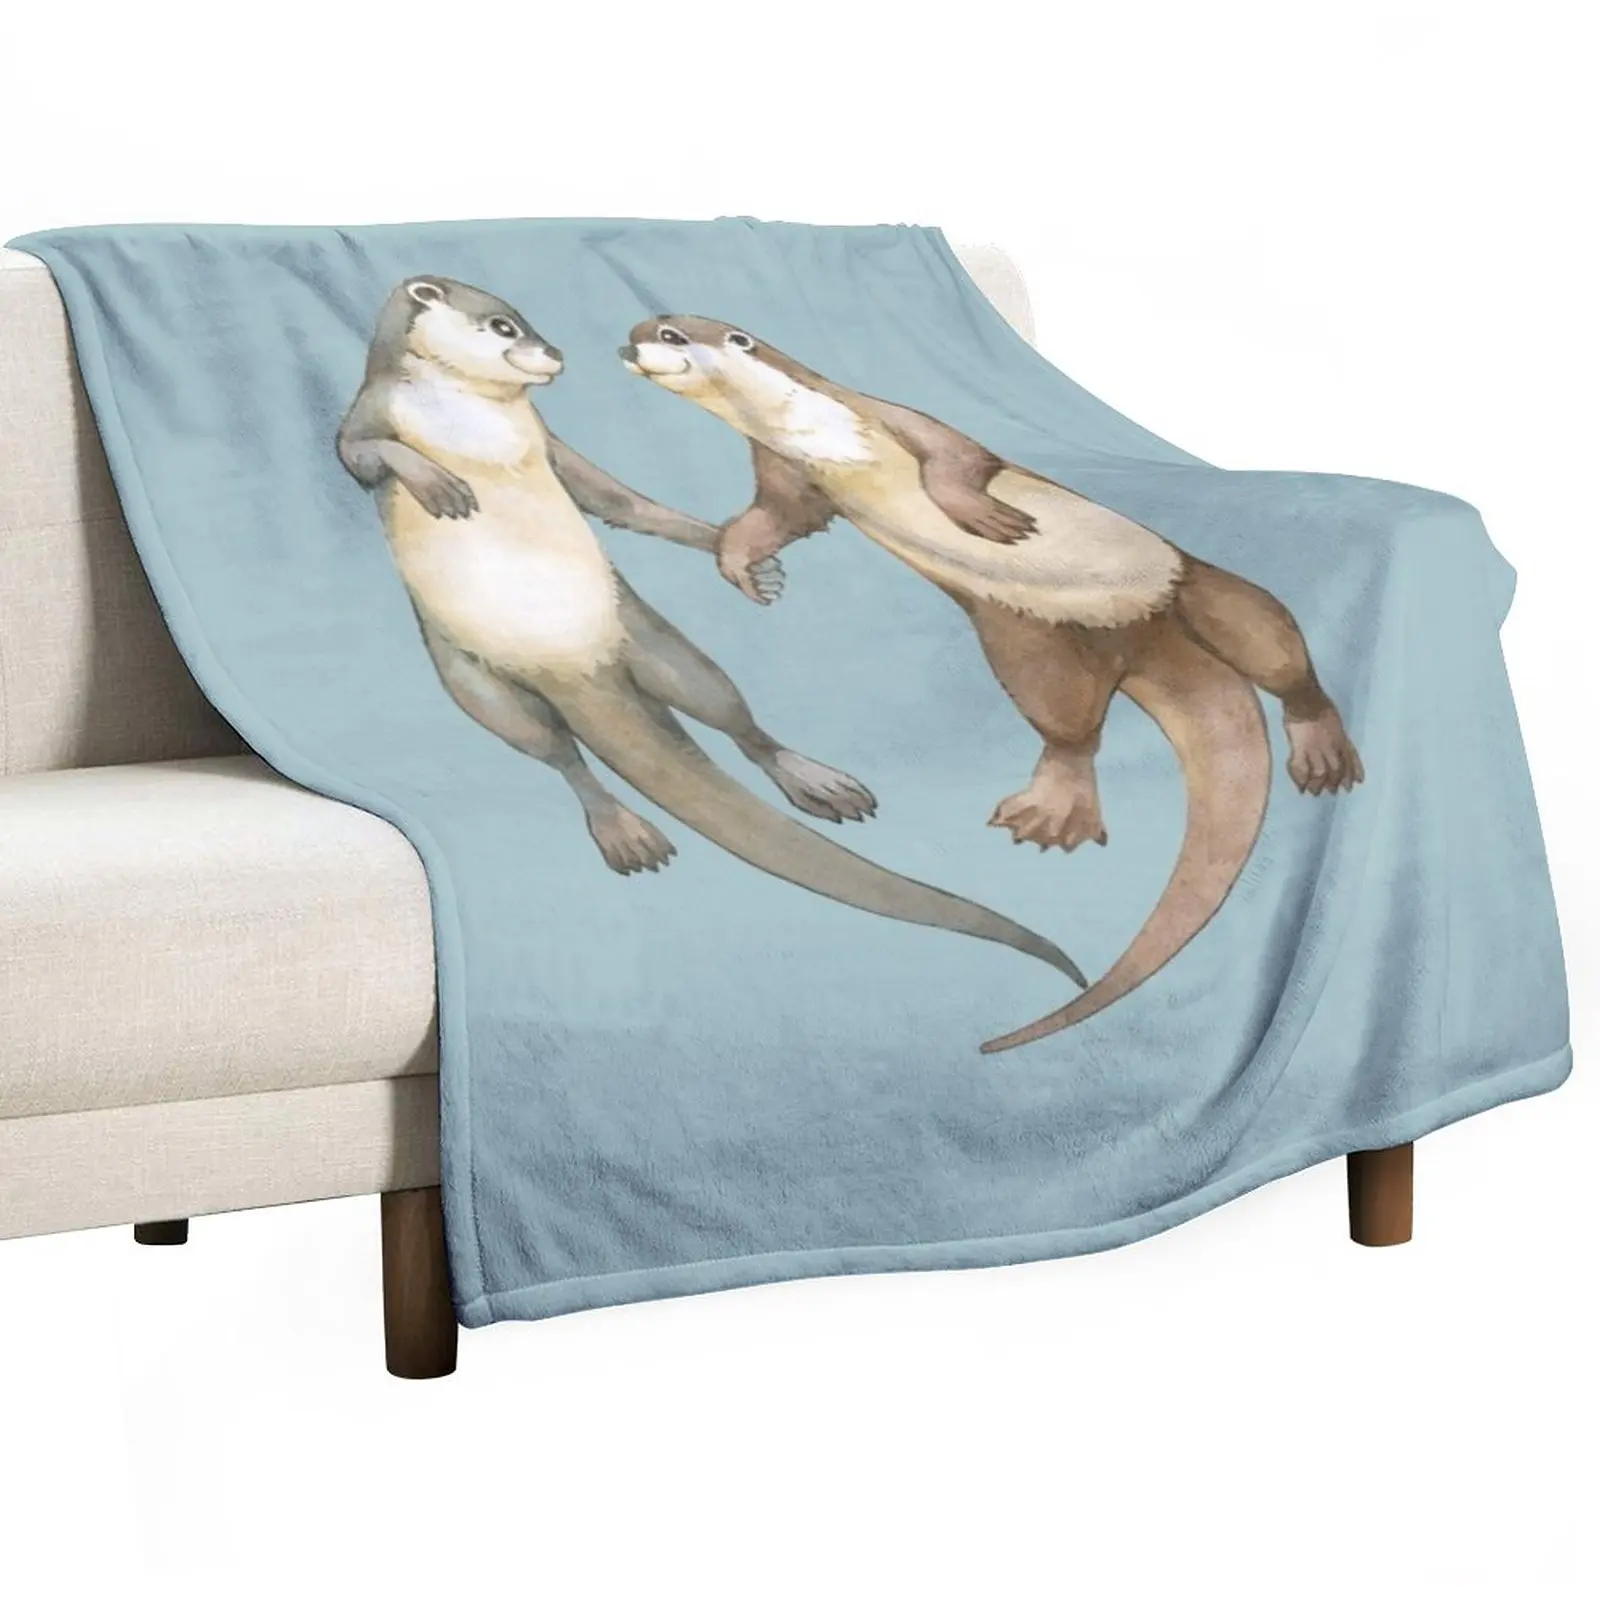 

Watercolor Significant Otter Throw Blanket Decorative Sofa Blanket Summer Bedding Blankets Luxury St Blanket